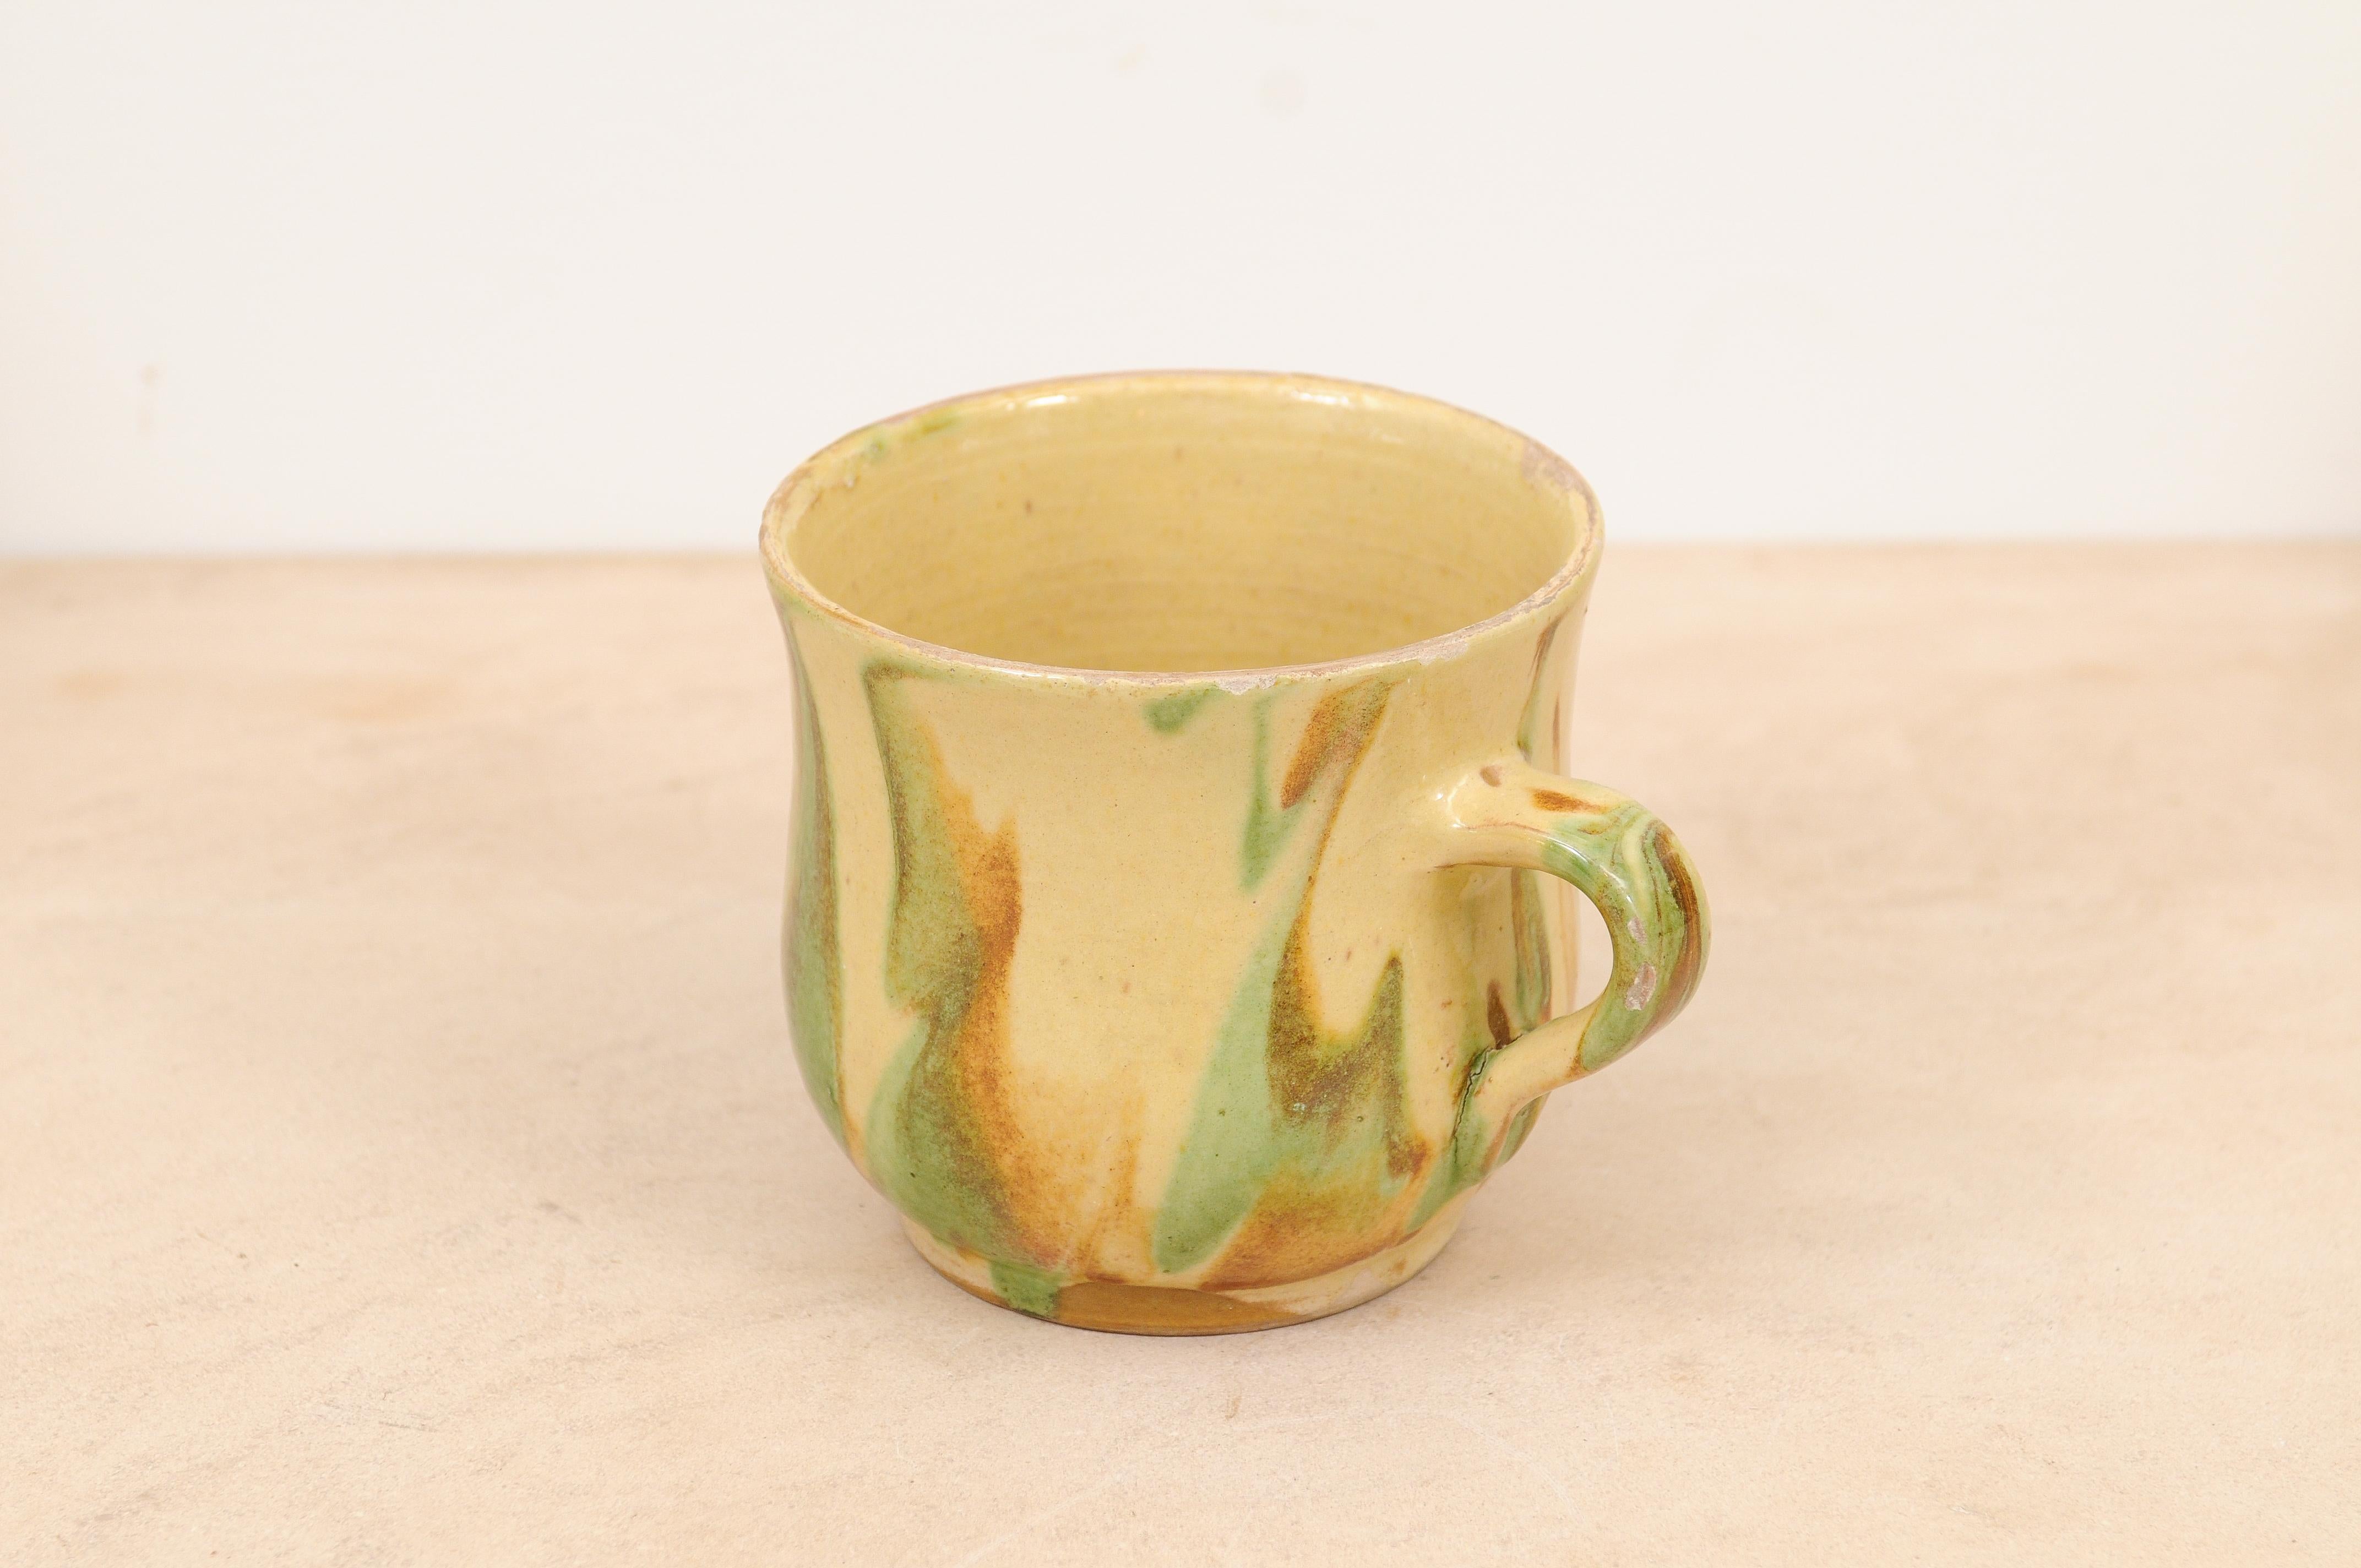 Rustic French 19th Century Pottery Mug with Yellow, Green and Rust Glaze For Sale 2